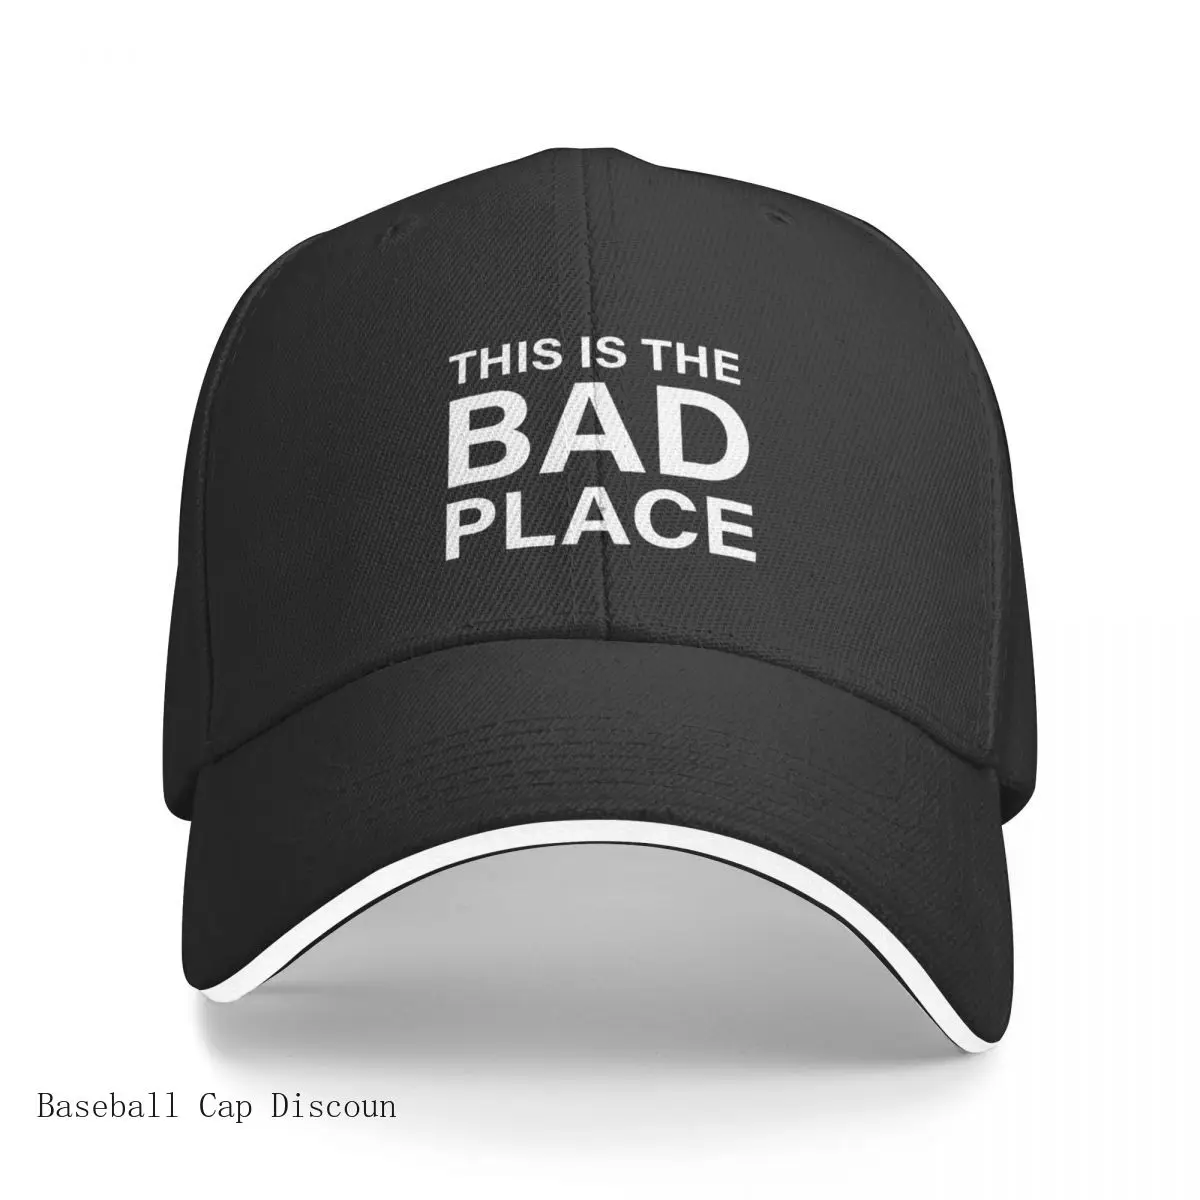 

New This Is The Bad Place (Black) Bucket Hat Baseball Cap Sunscreen Bobble Hat Caps For Women Men's